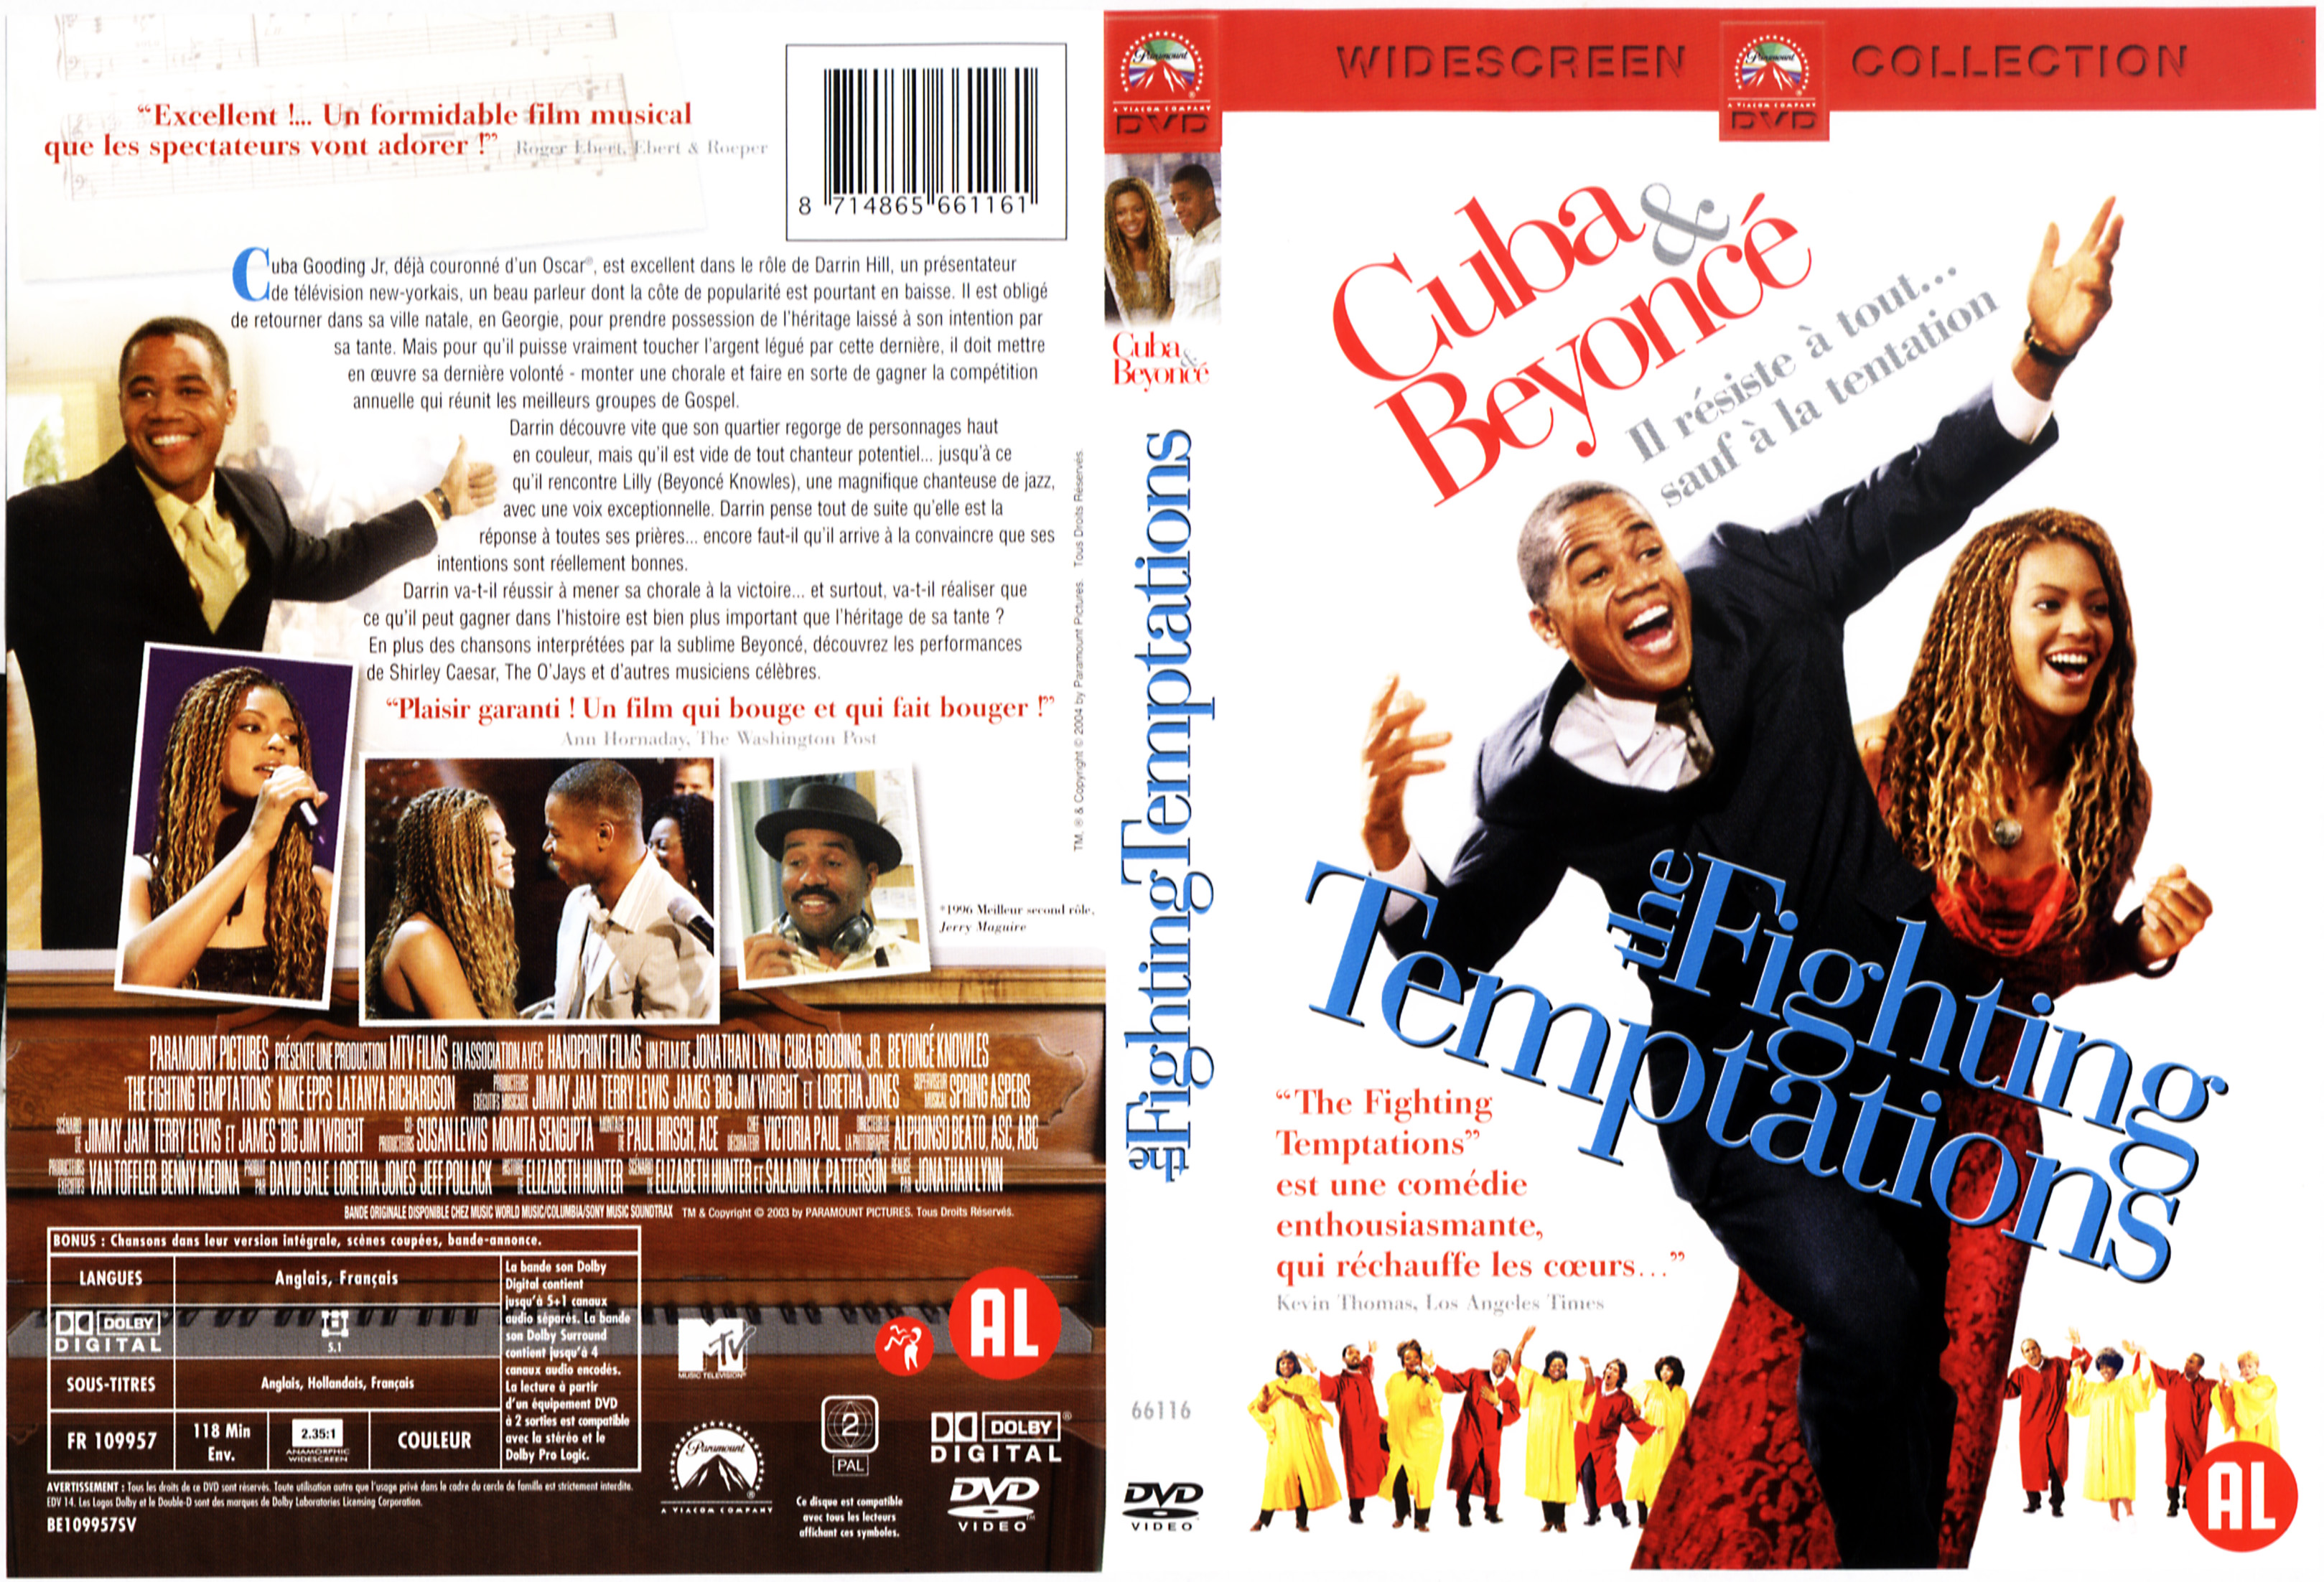 Jaquette DVD The fighting temptations